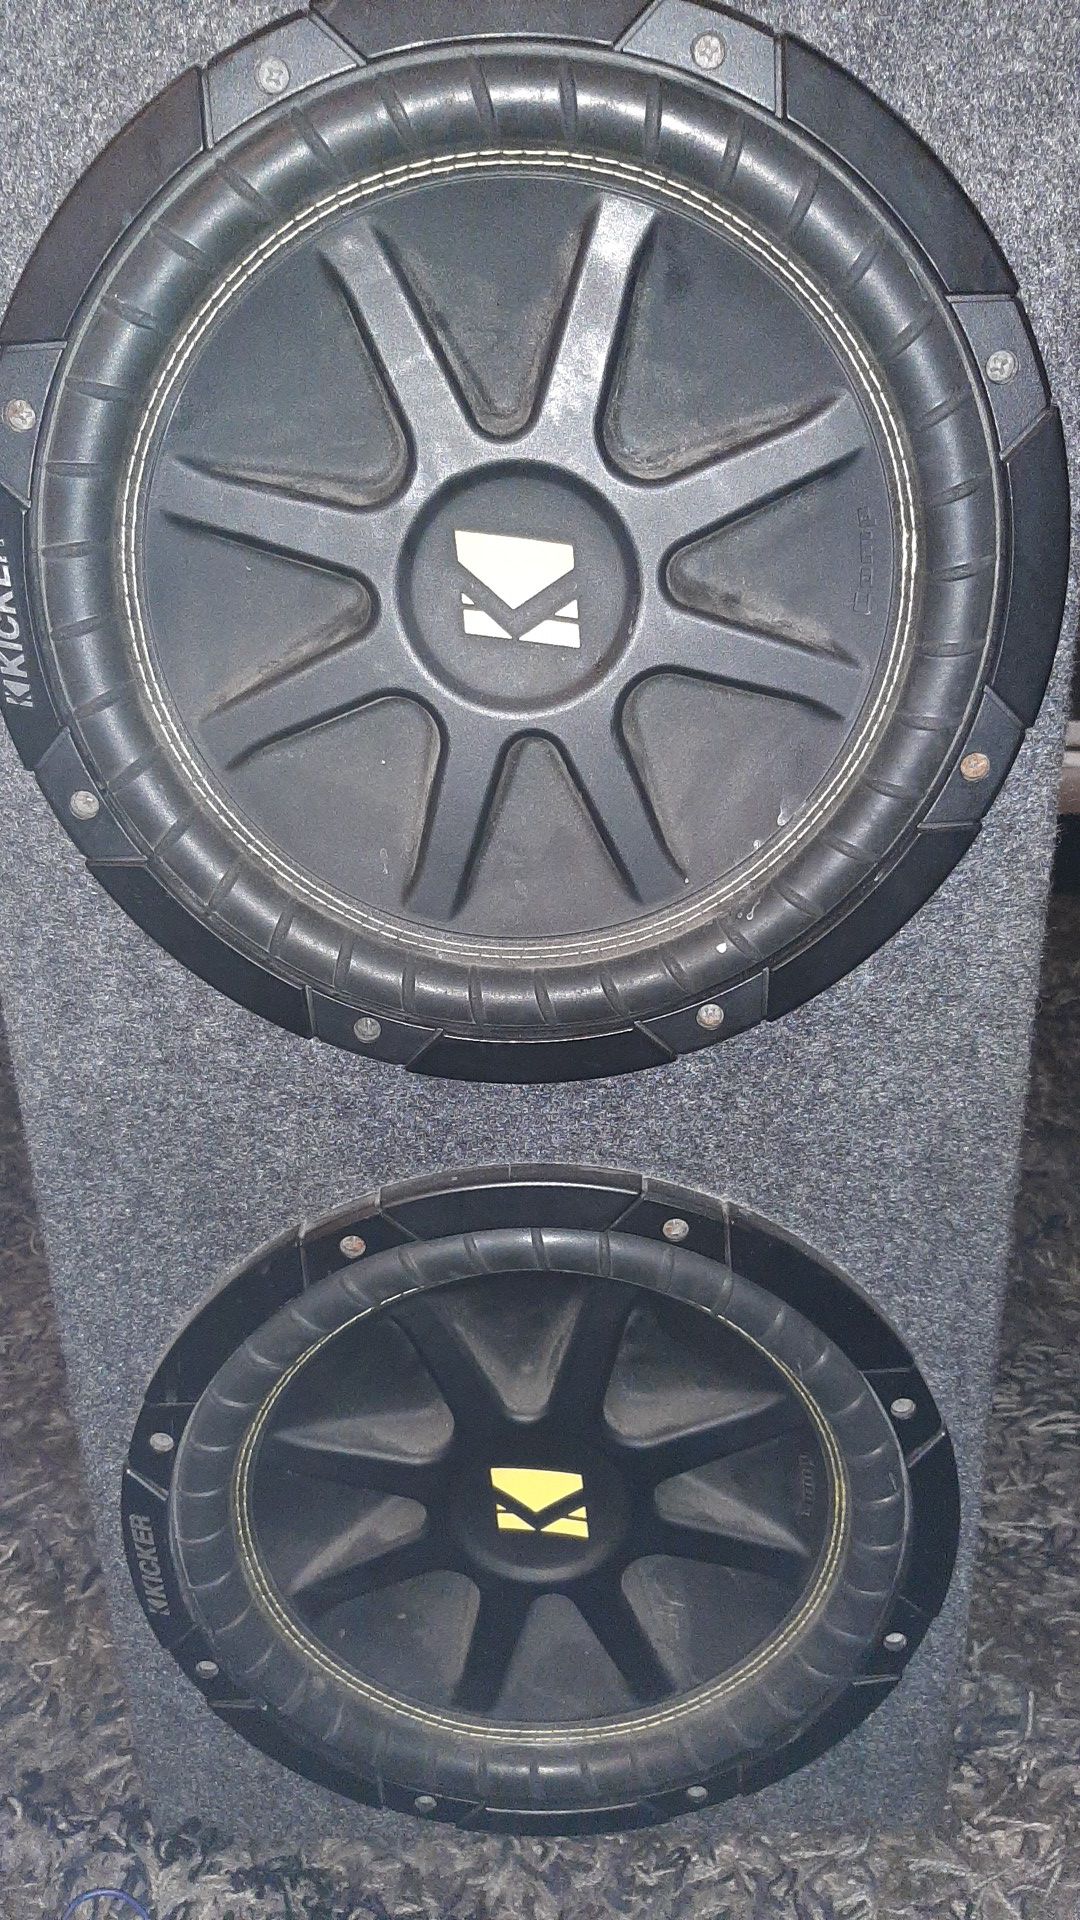 Two 12s kicker comps and a 1200 w amp